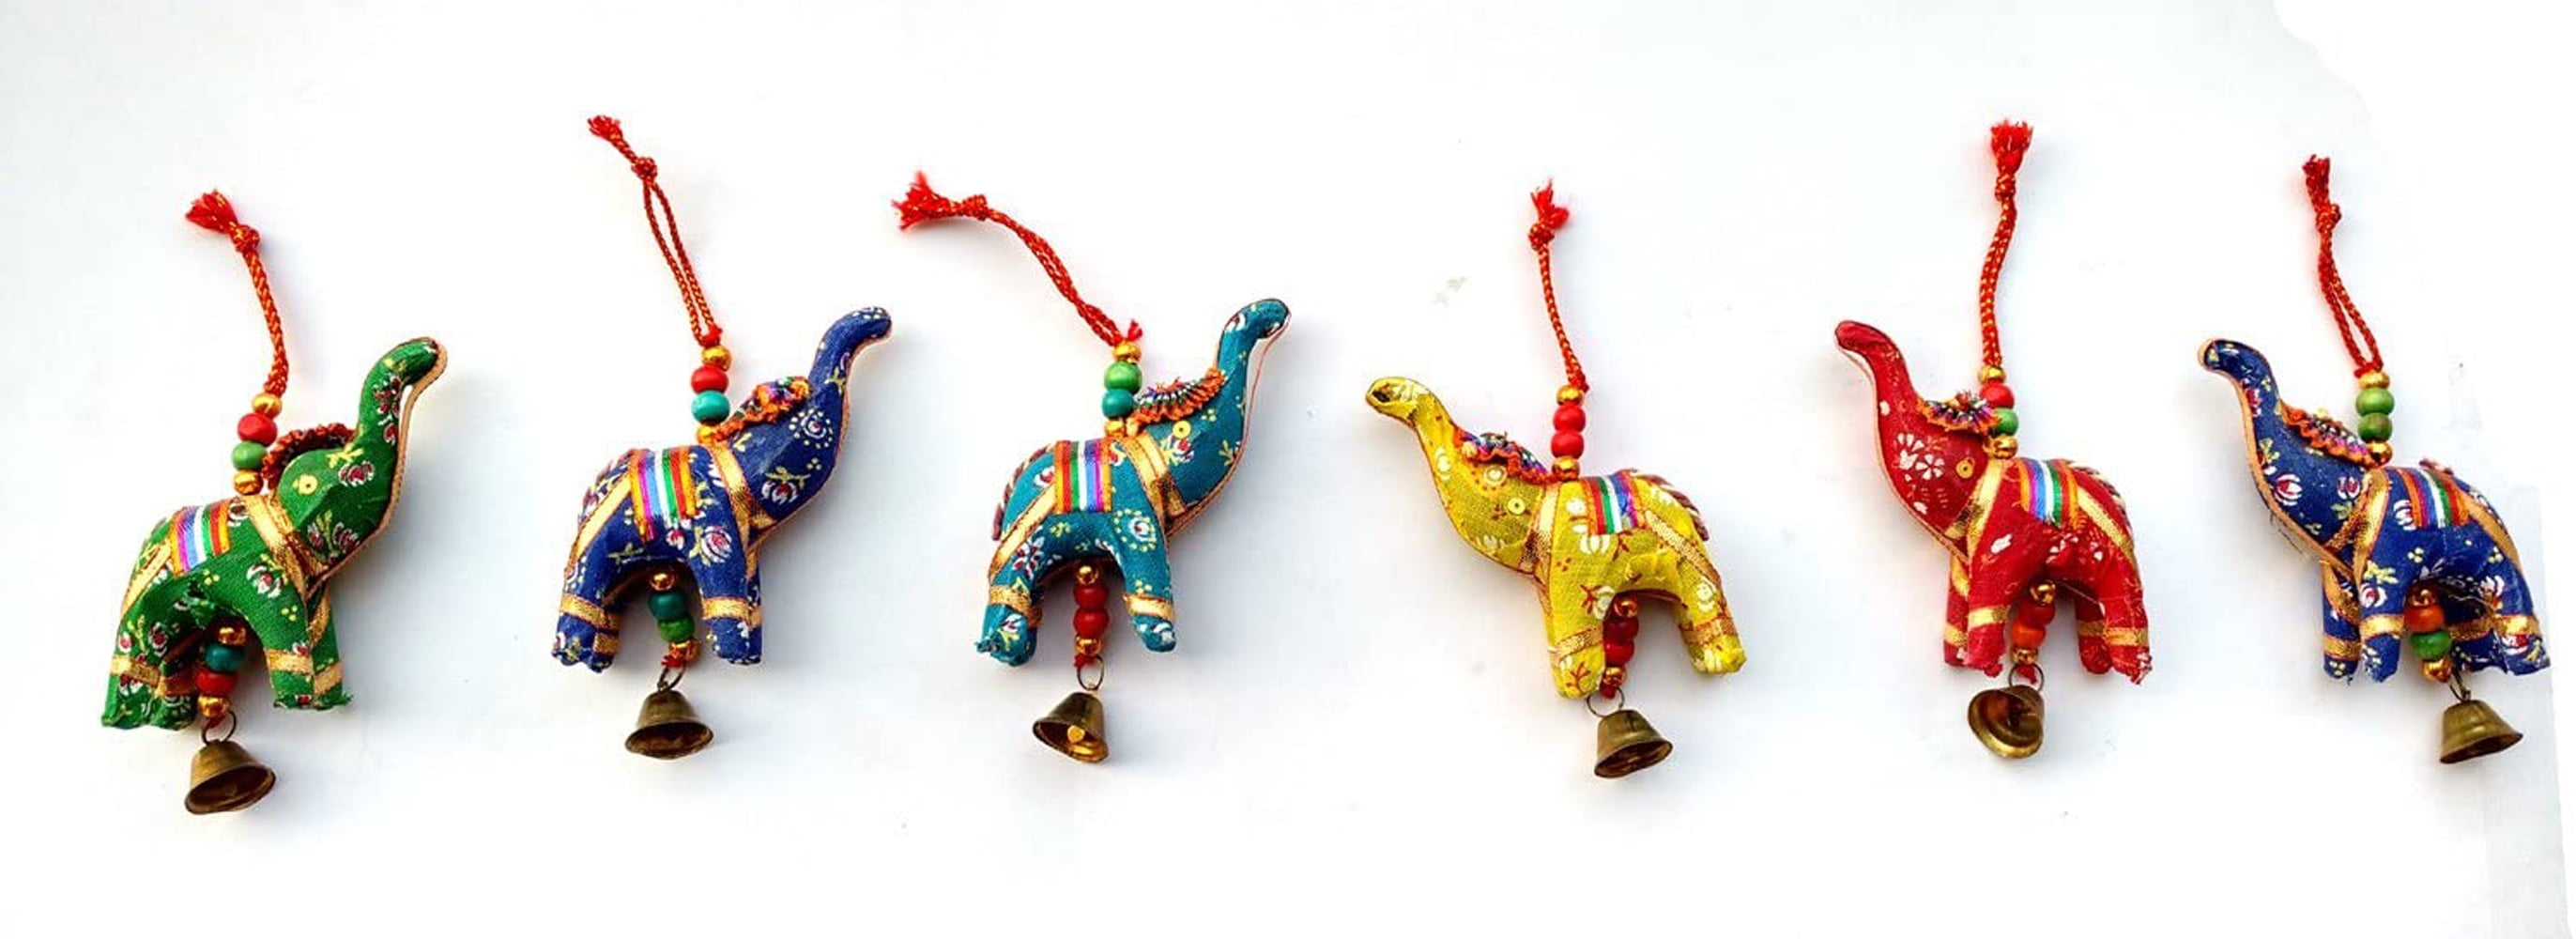 Rastogi Handicrafts Elephant Bell Hanging Layer Set of 6 Home Christmas Hanging Decorative Ornaments Multi Colored Indian Traditional Blue